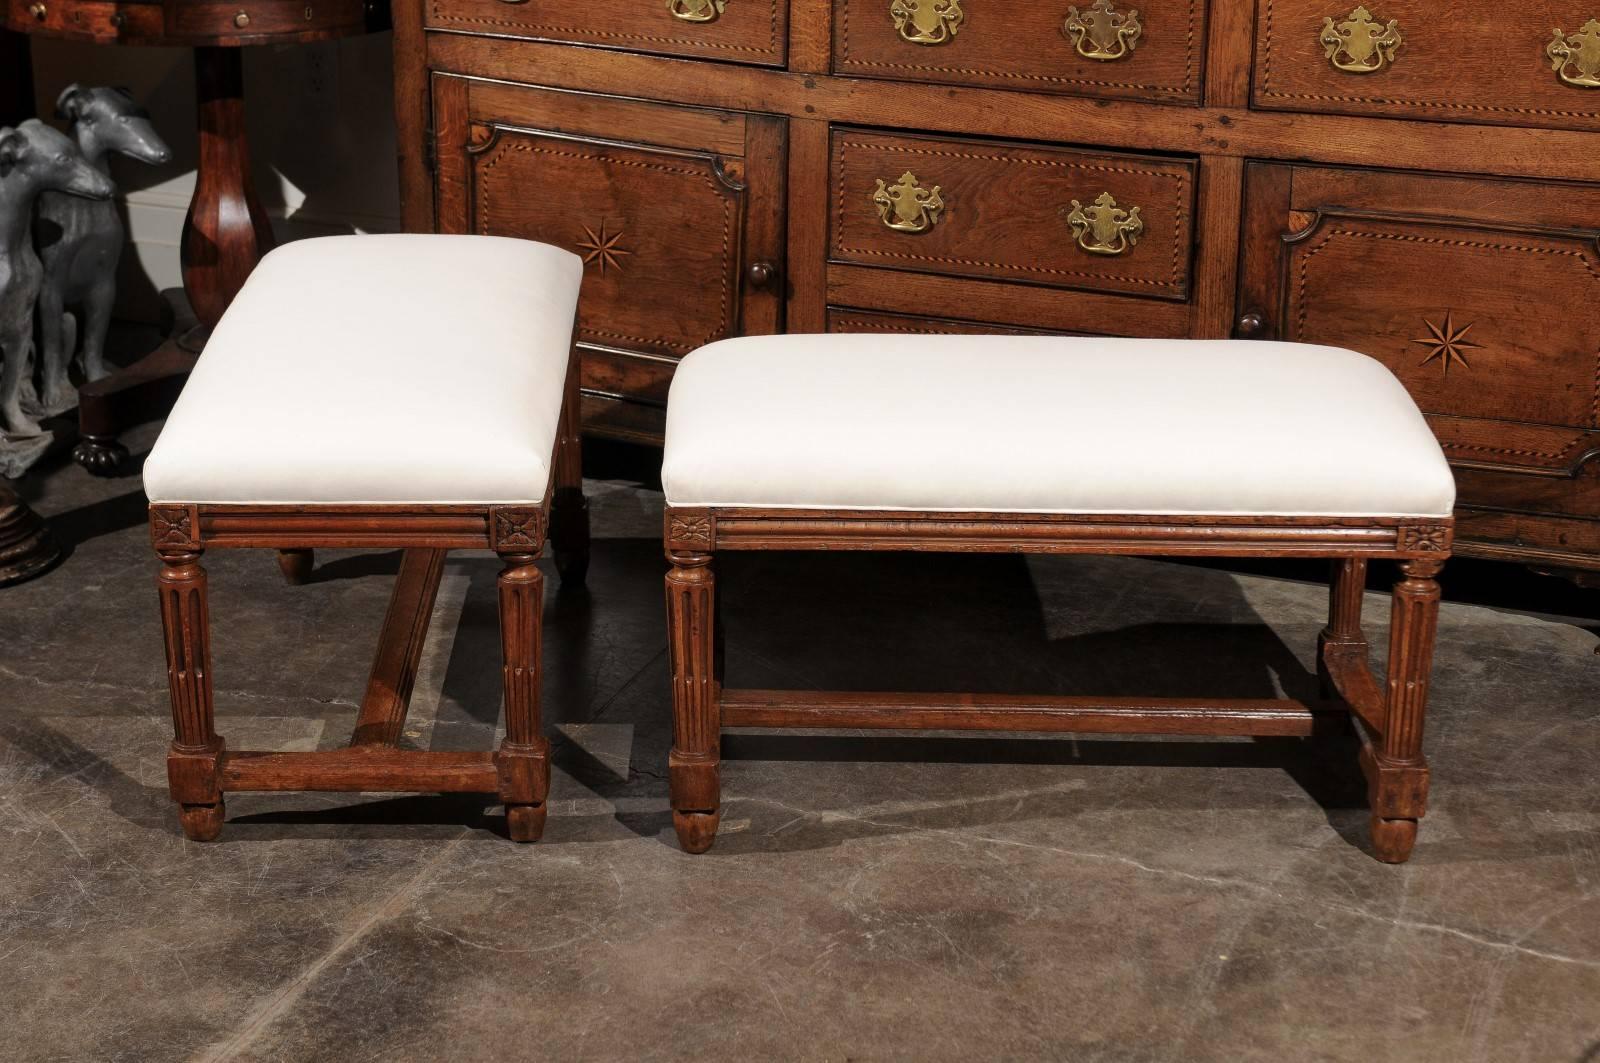 Pair of Italian Walnut Upholstered Wooden Benches from the Early 19th Century 5